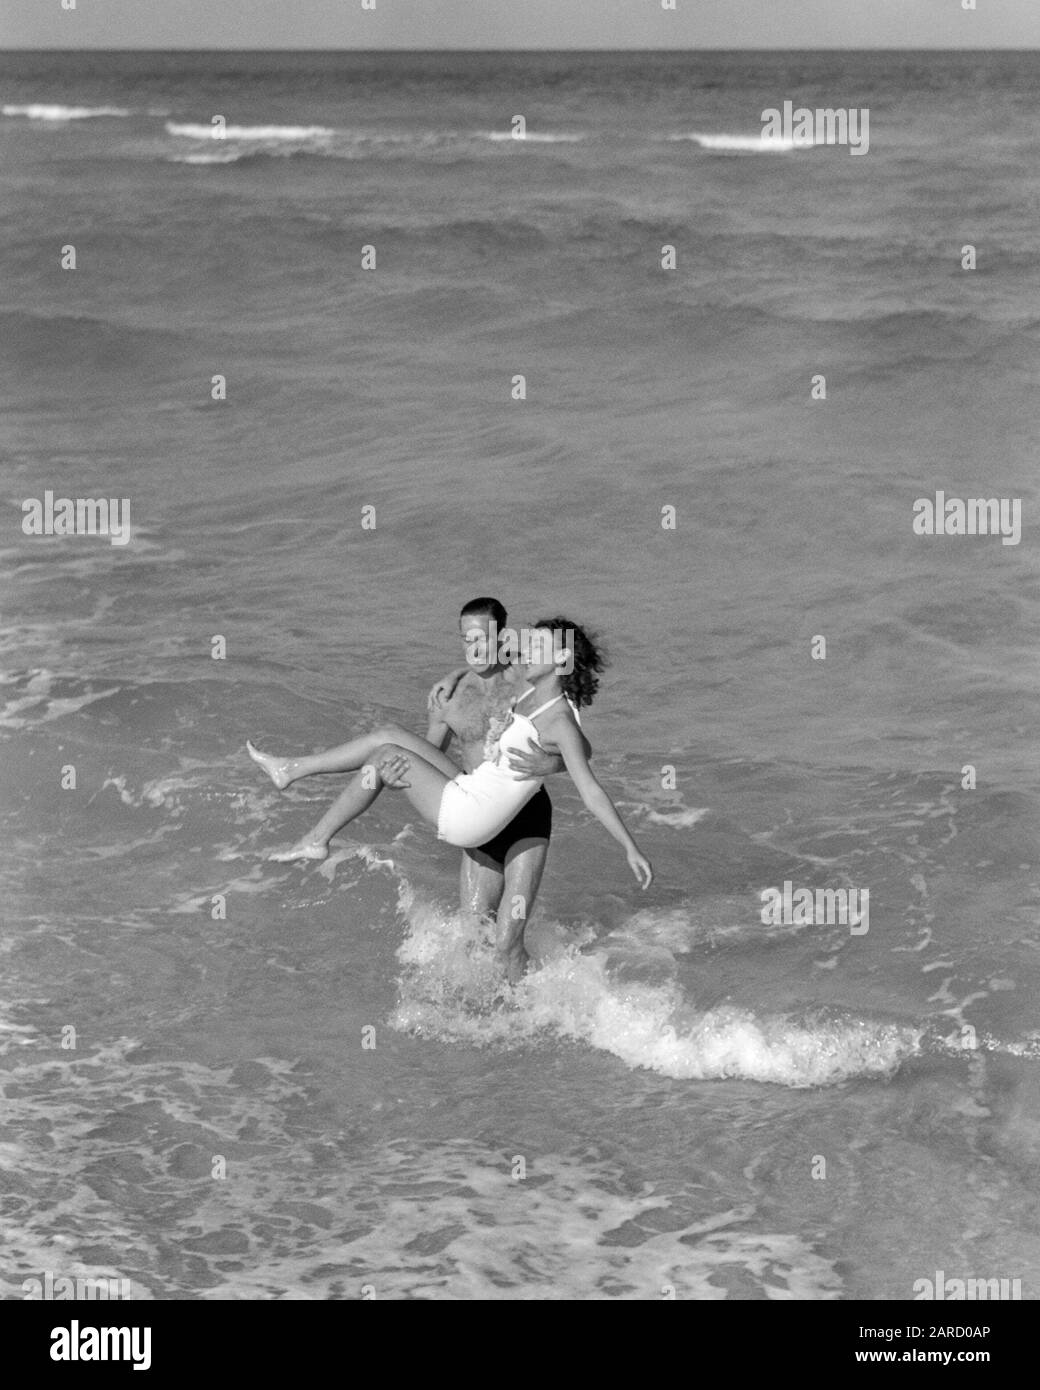 1930s 1940s LAUGHING SMILING VACATION COUPLE WEARING BATHING SUITS PLAYING IN OCEAN SURF AT BEACH MAN CARRYING WOMAN FLORIDA USA - b7080 HAR001 HARS LIFTING TROPICAL YOUNG ADULT BALANCE COMIC TEAMWORK VACATION JOY LIFESTYLE OCEAN FEMALES MARRIED SPOUSE HUSBANDS HEALTHINESS UNITED STATES COPY SPACE FRIENDSHIP FULL-LENGTH LADIES PERSONS UNITED STATES OF AMERICA MALES SURF B&W PARTNER NORTH AMERICA NORTH AMERICAN TIME OFF SHORE HUMOROUS HAPPINESS LEISURE STRENGTH TRIP GETAWAY EXCITEMENT RECREATION COMICAL AT IN BEACHES HOLIDAYS CONNECTION CONCEPTUAL COMEDY SANDY STYLISH BATHING SUITS RELAXATION Stock Photo